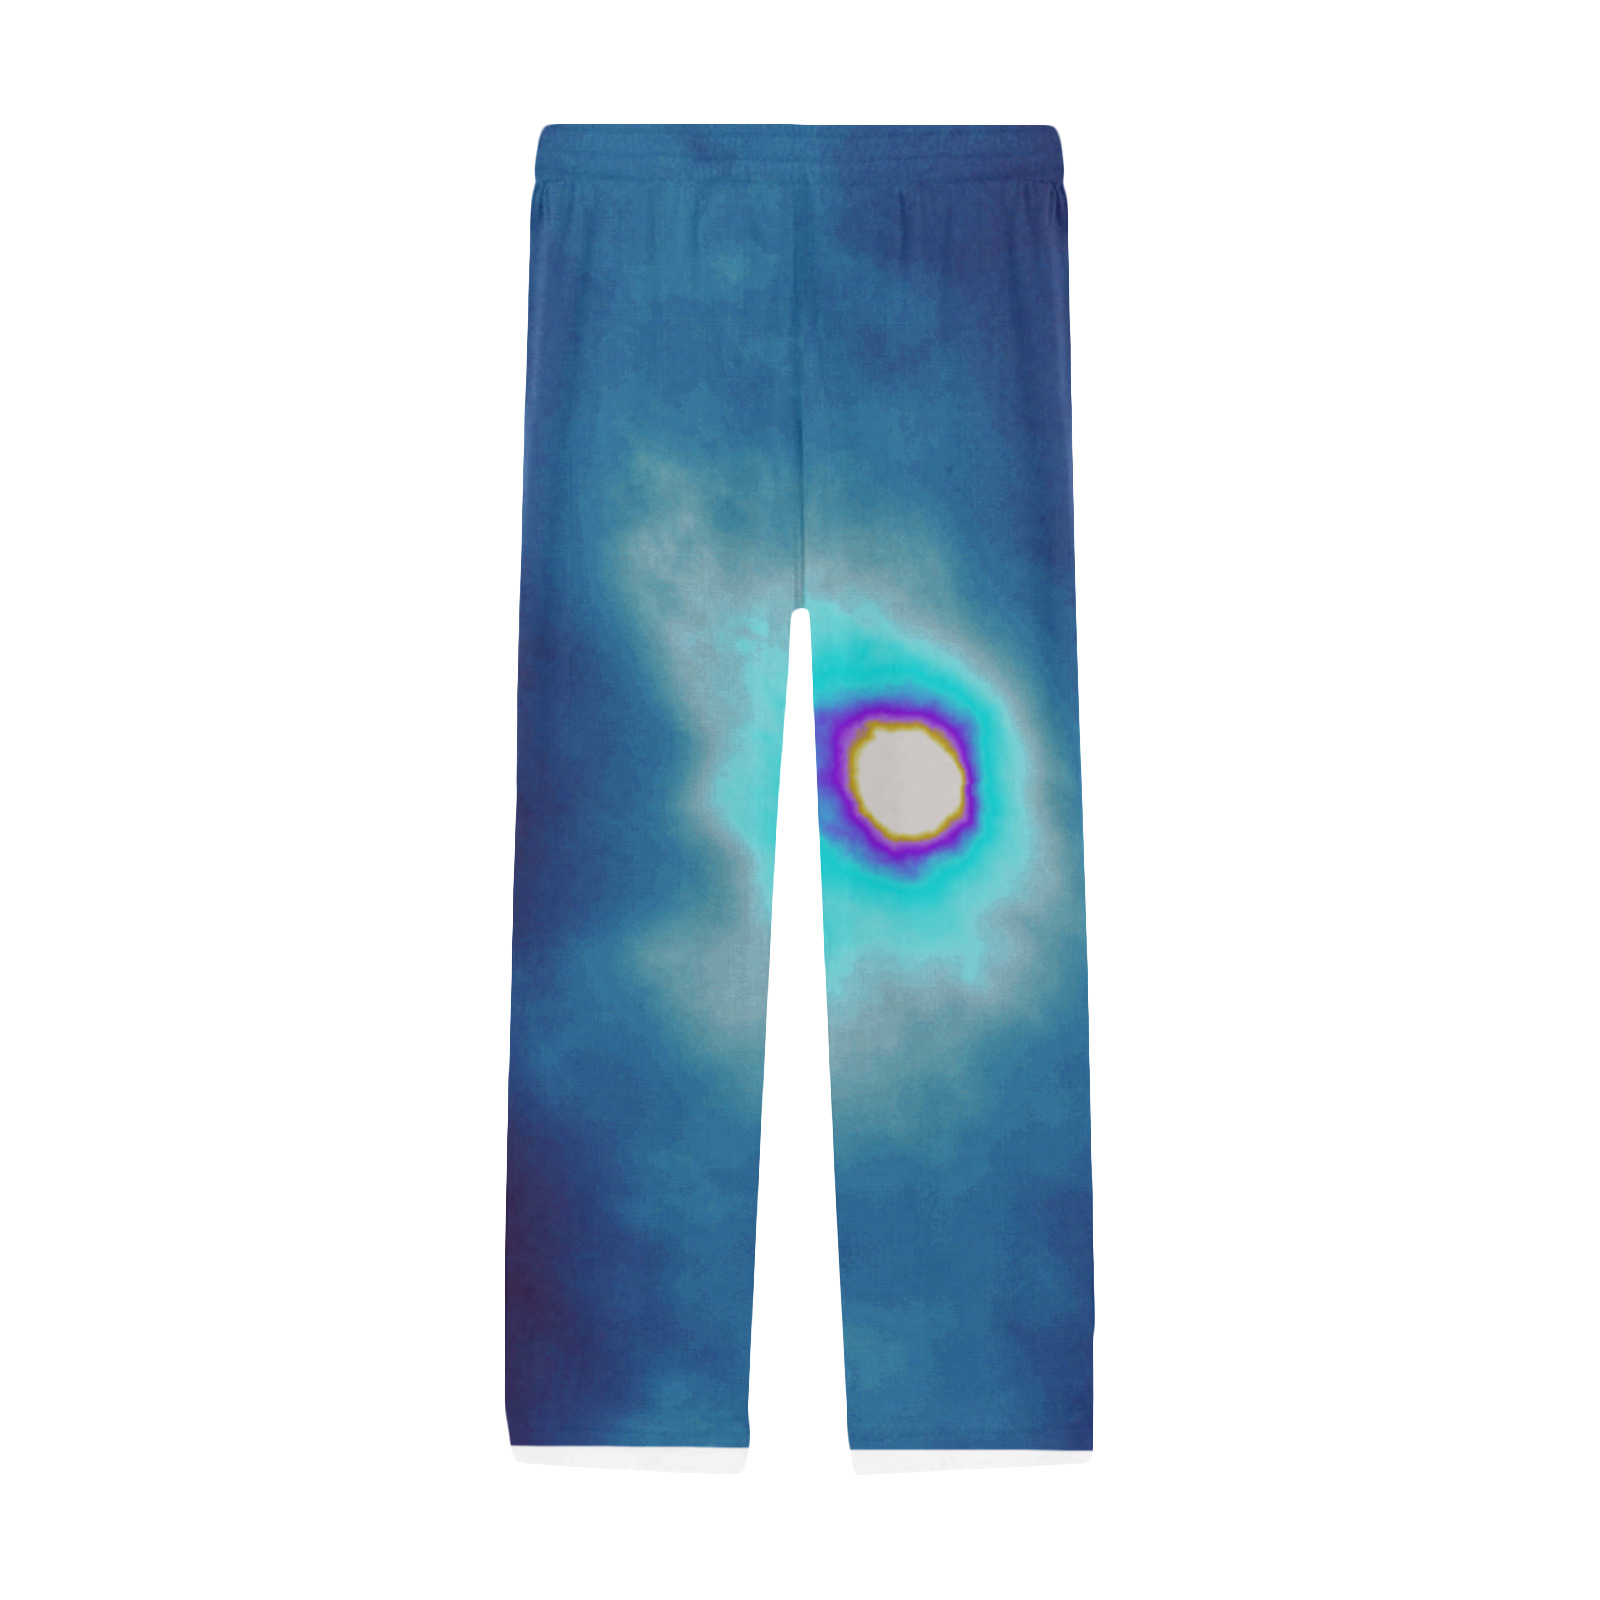 Dimensional Eclipse In The Multiverse 496222 Men's Pajama Trousers